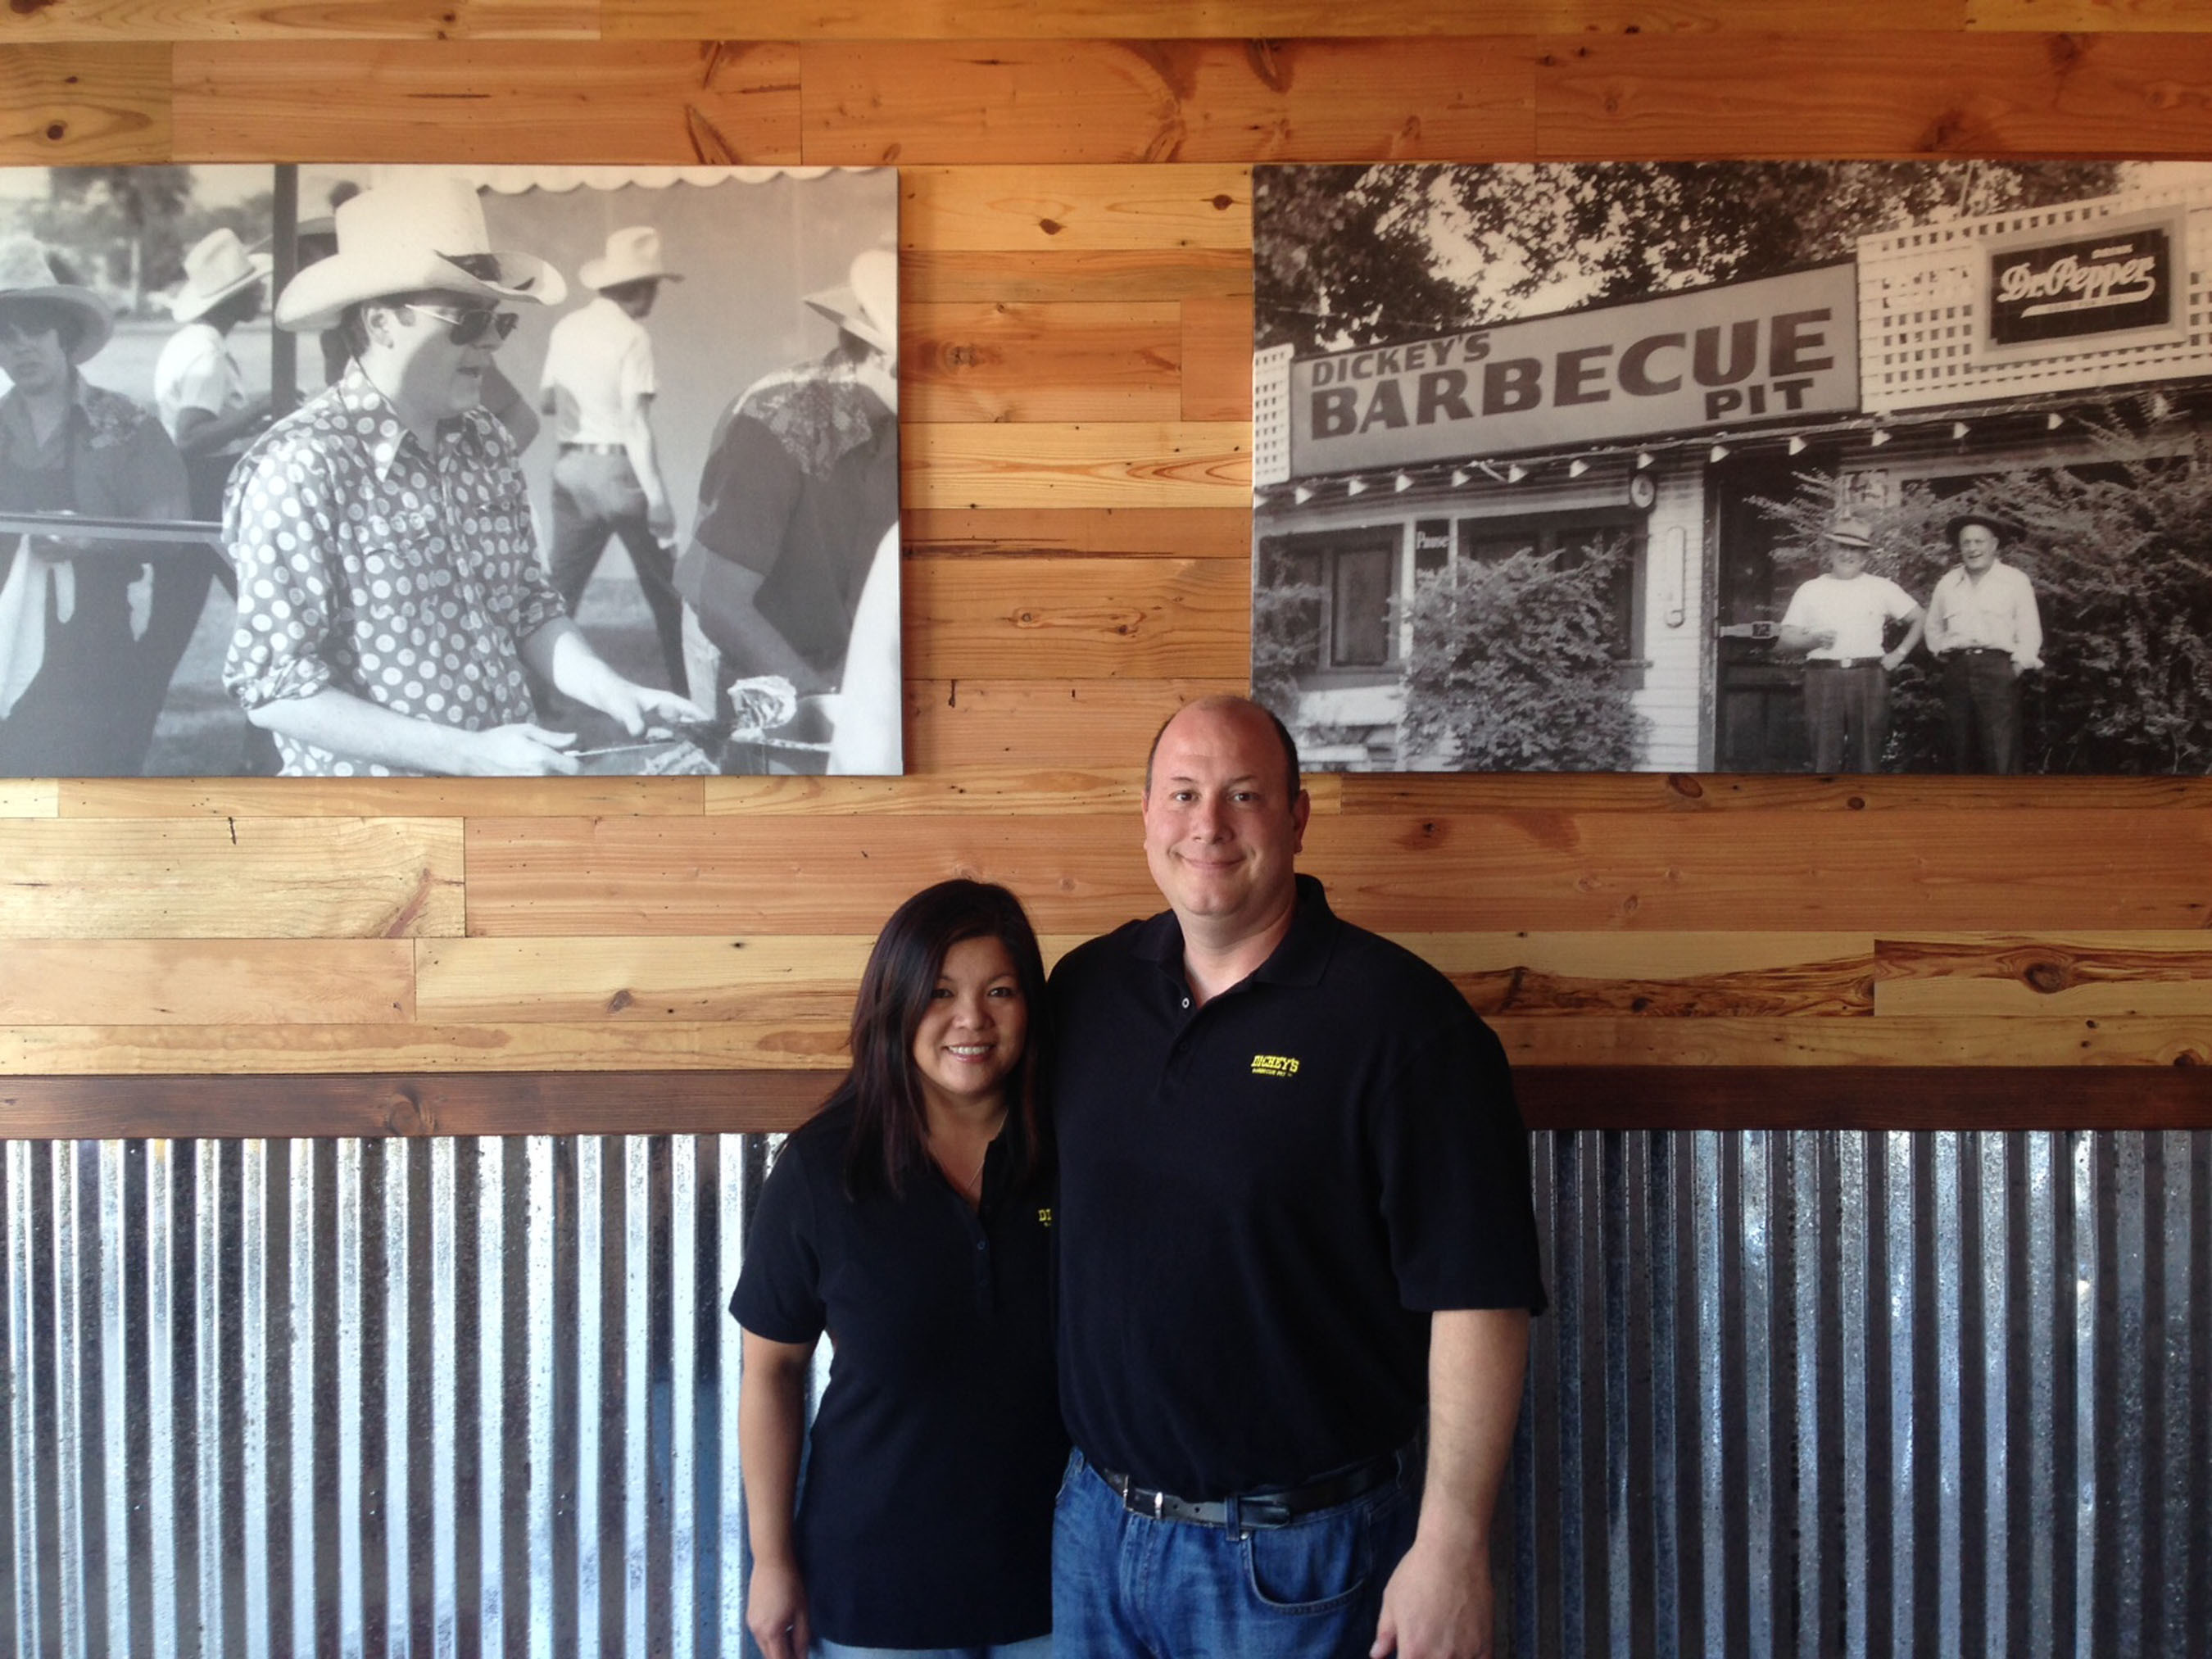 The new Dickey's Barbecue Pit in Pinole opens on Thursday. Local owners Anthony and Sherry LoForte. (PRNewsFoto/Dickey's Barbecue) (PRNewsFoto/DICKEY'S BARBECUE)